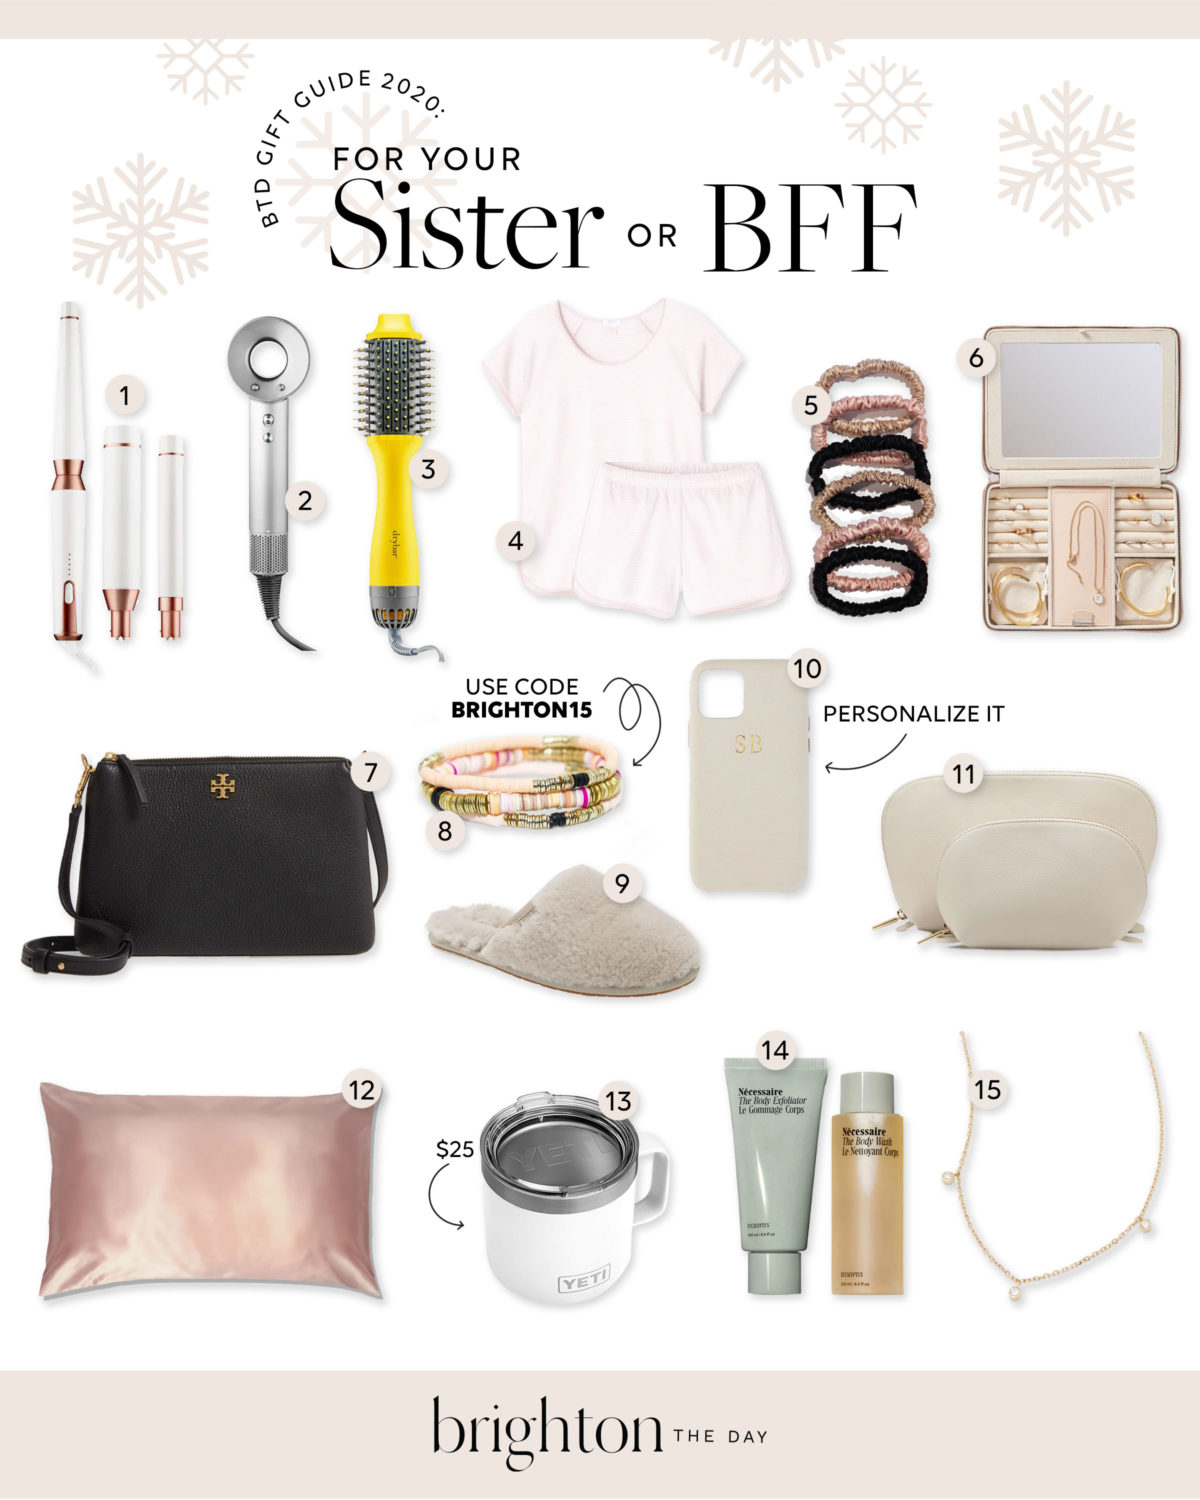 Gift guide for her, gift guide for sister or BFF